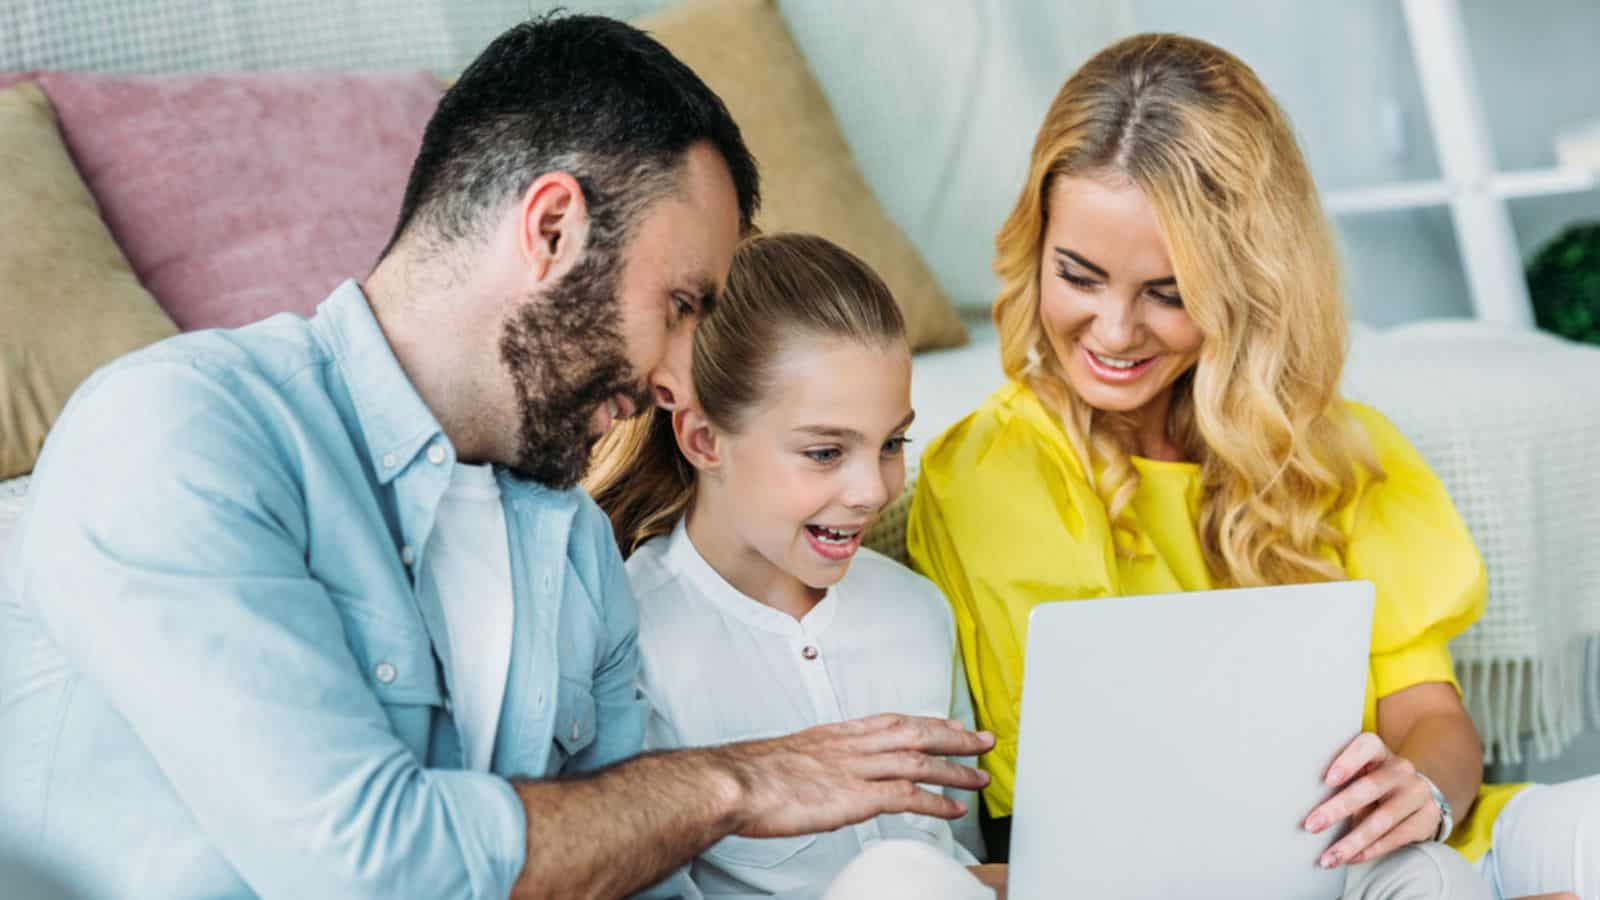 Smiling young family using laptop together